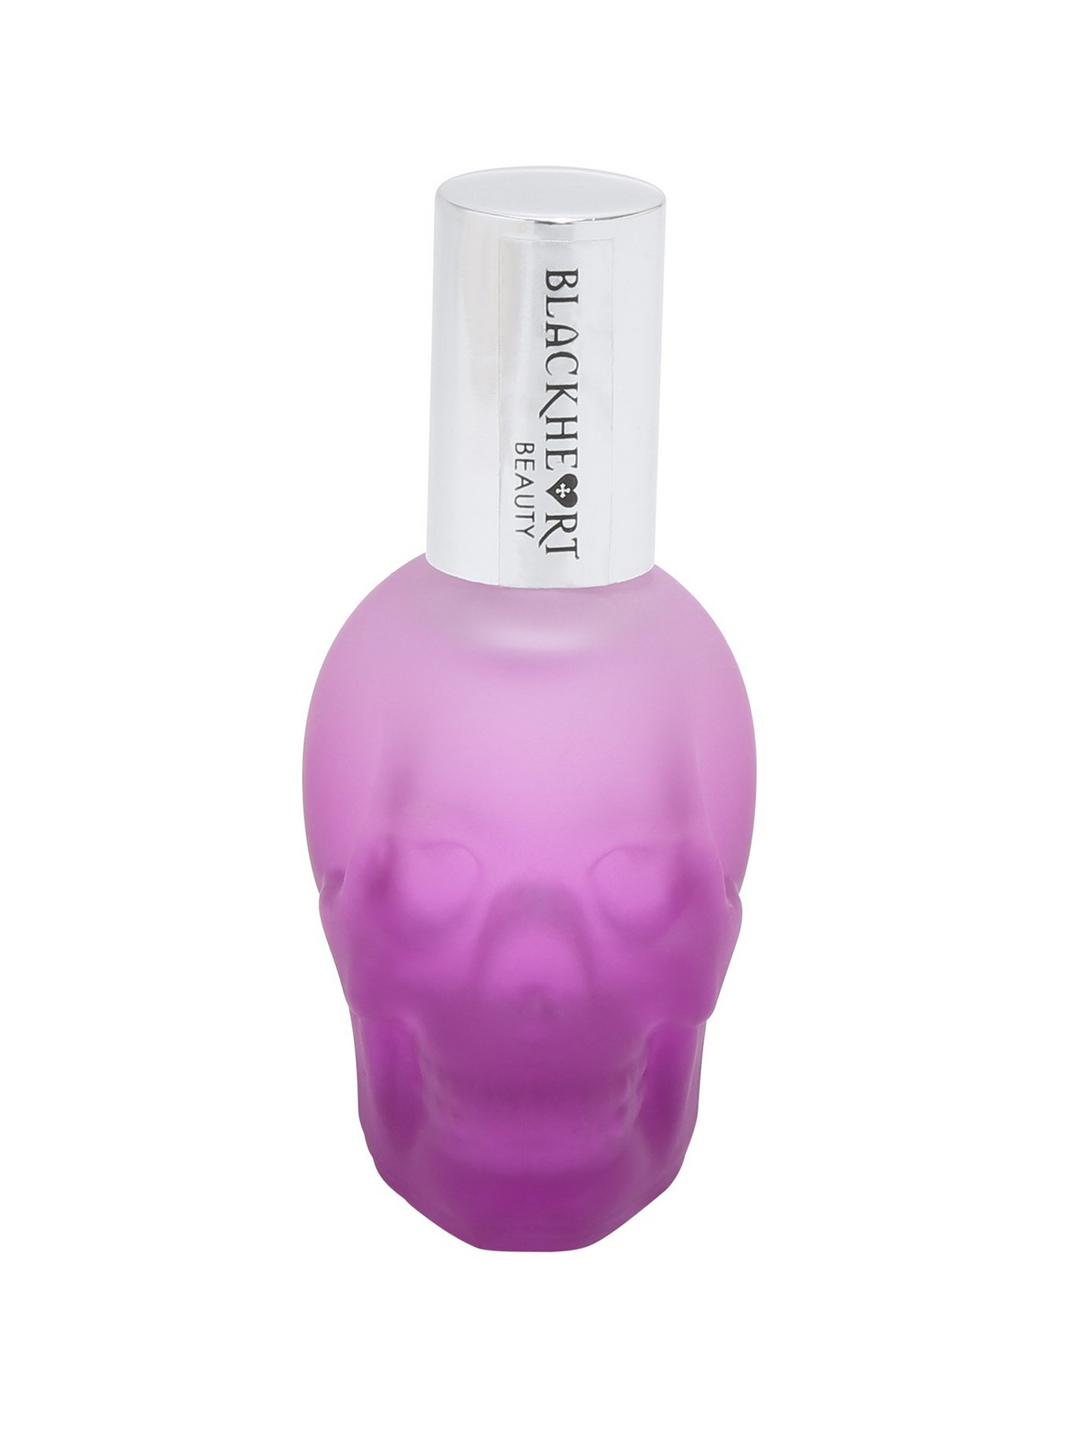 Blackheart Beauty Head In The Clouds Roller Ball Fragrance, , hi-res